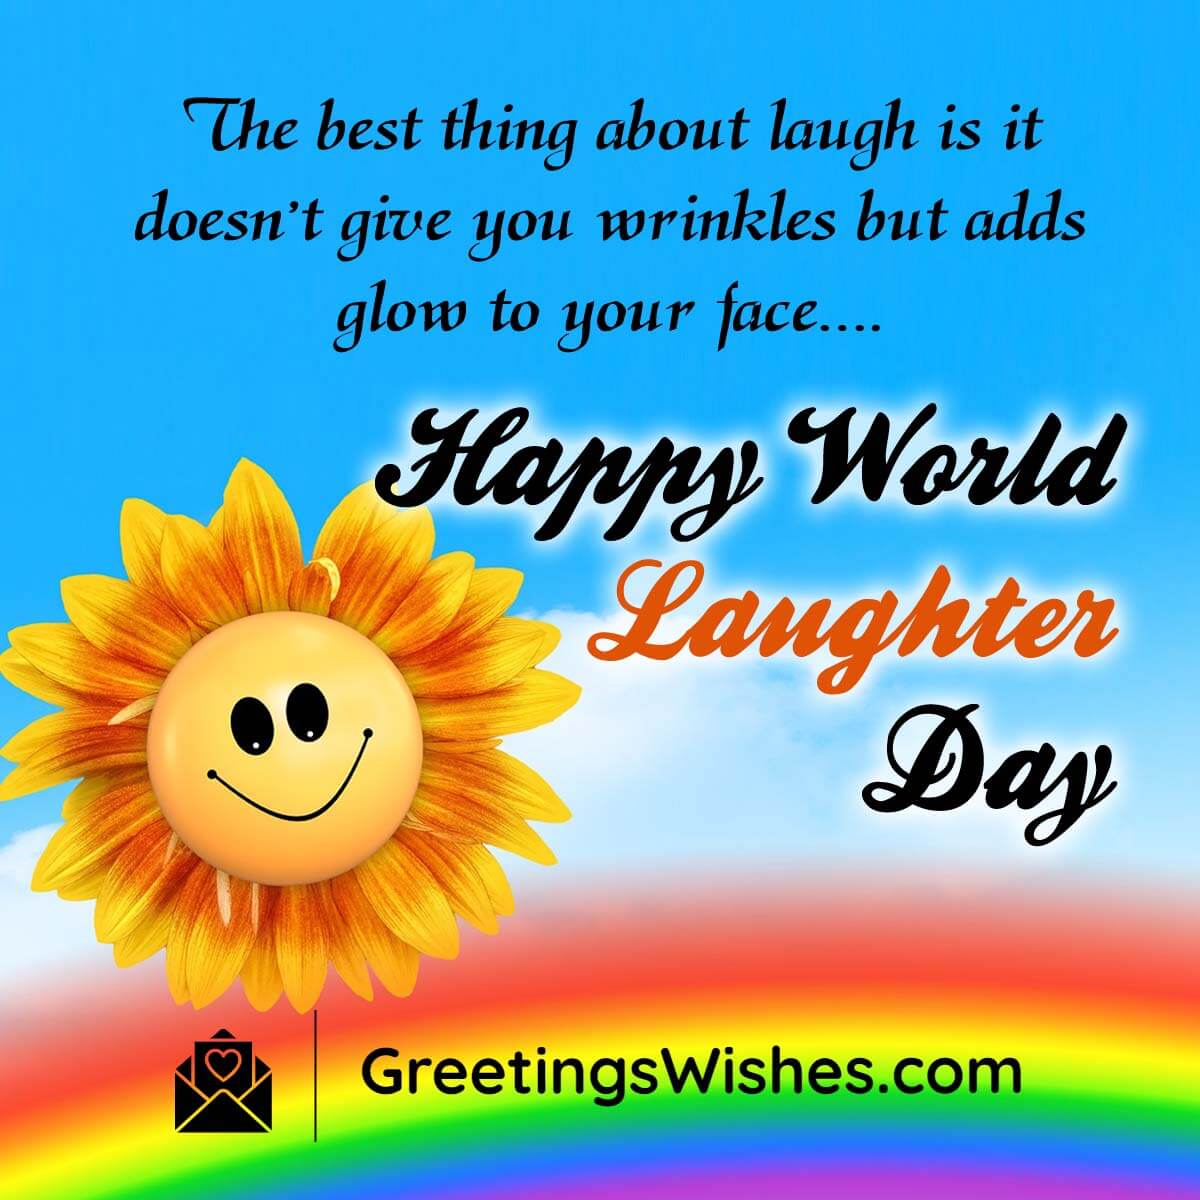 Laughter Day Wishes